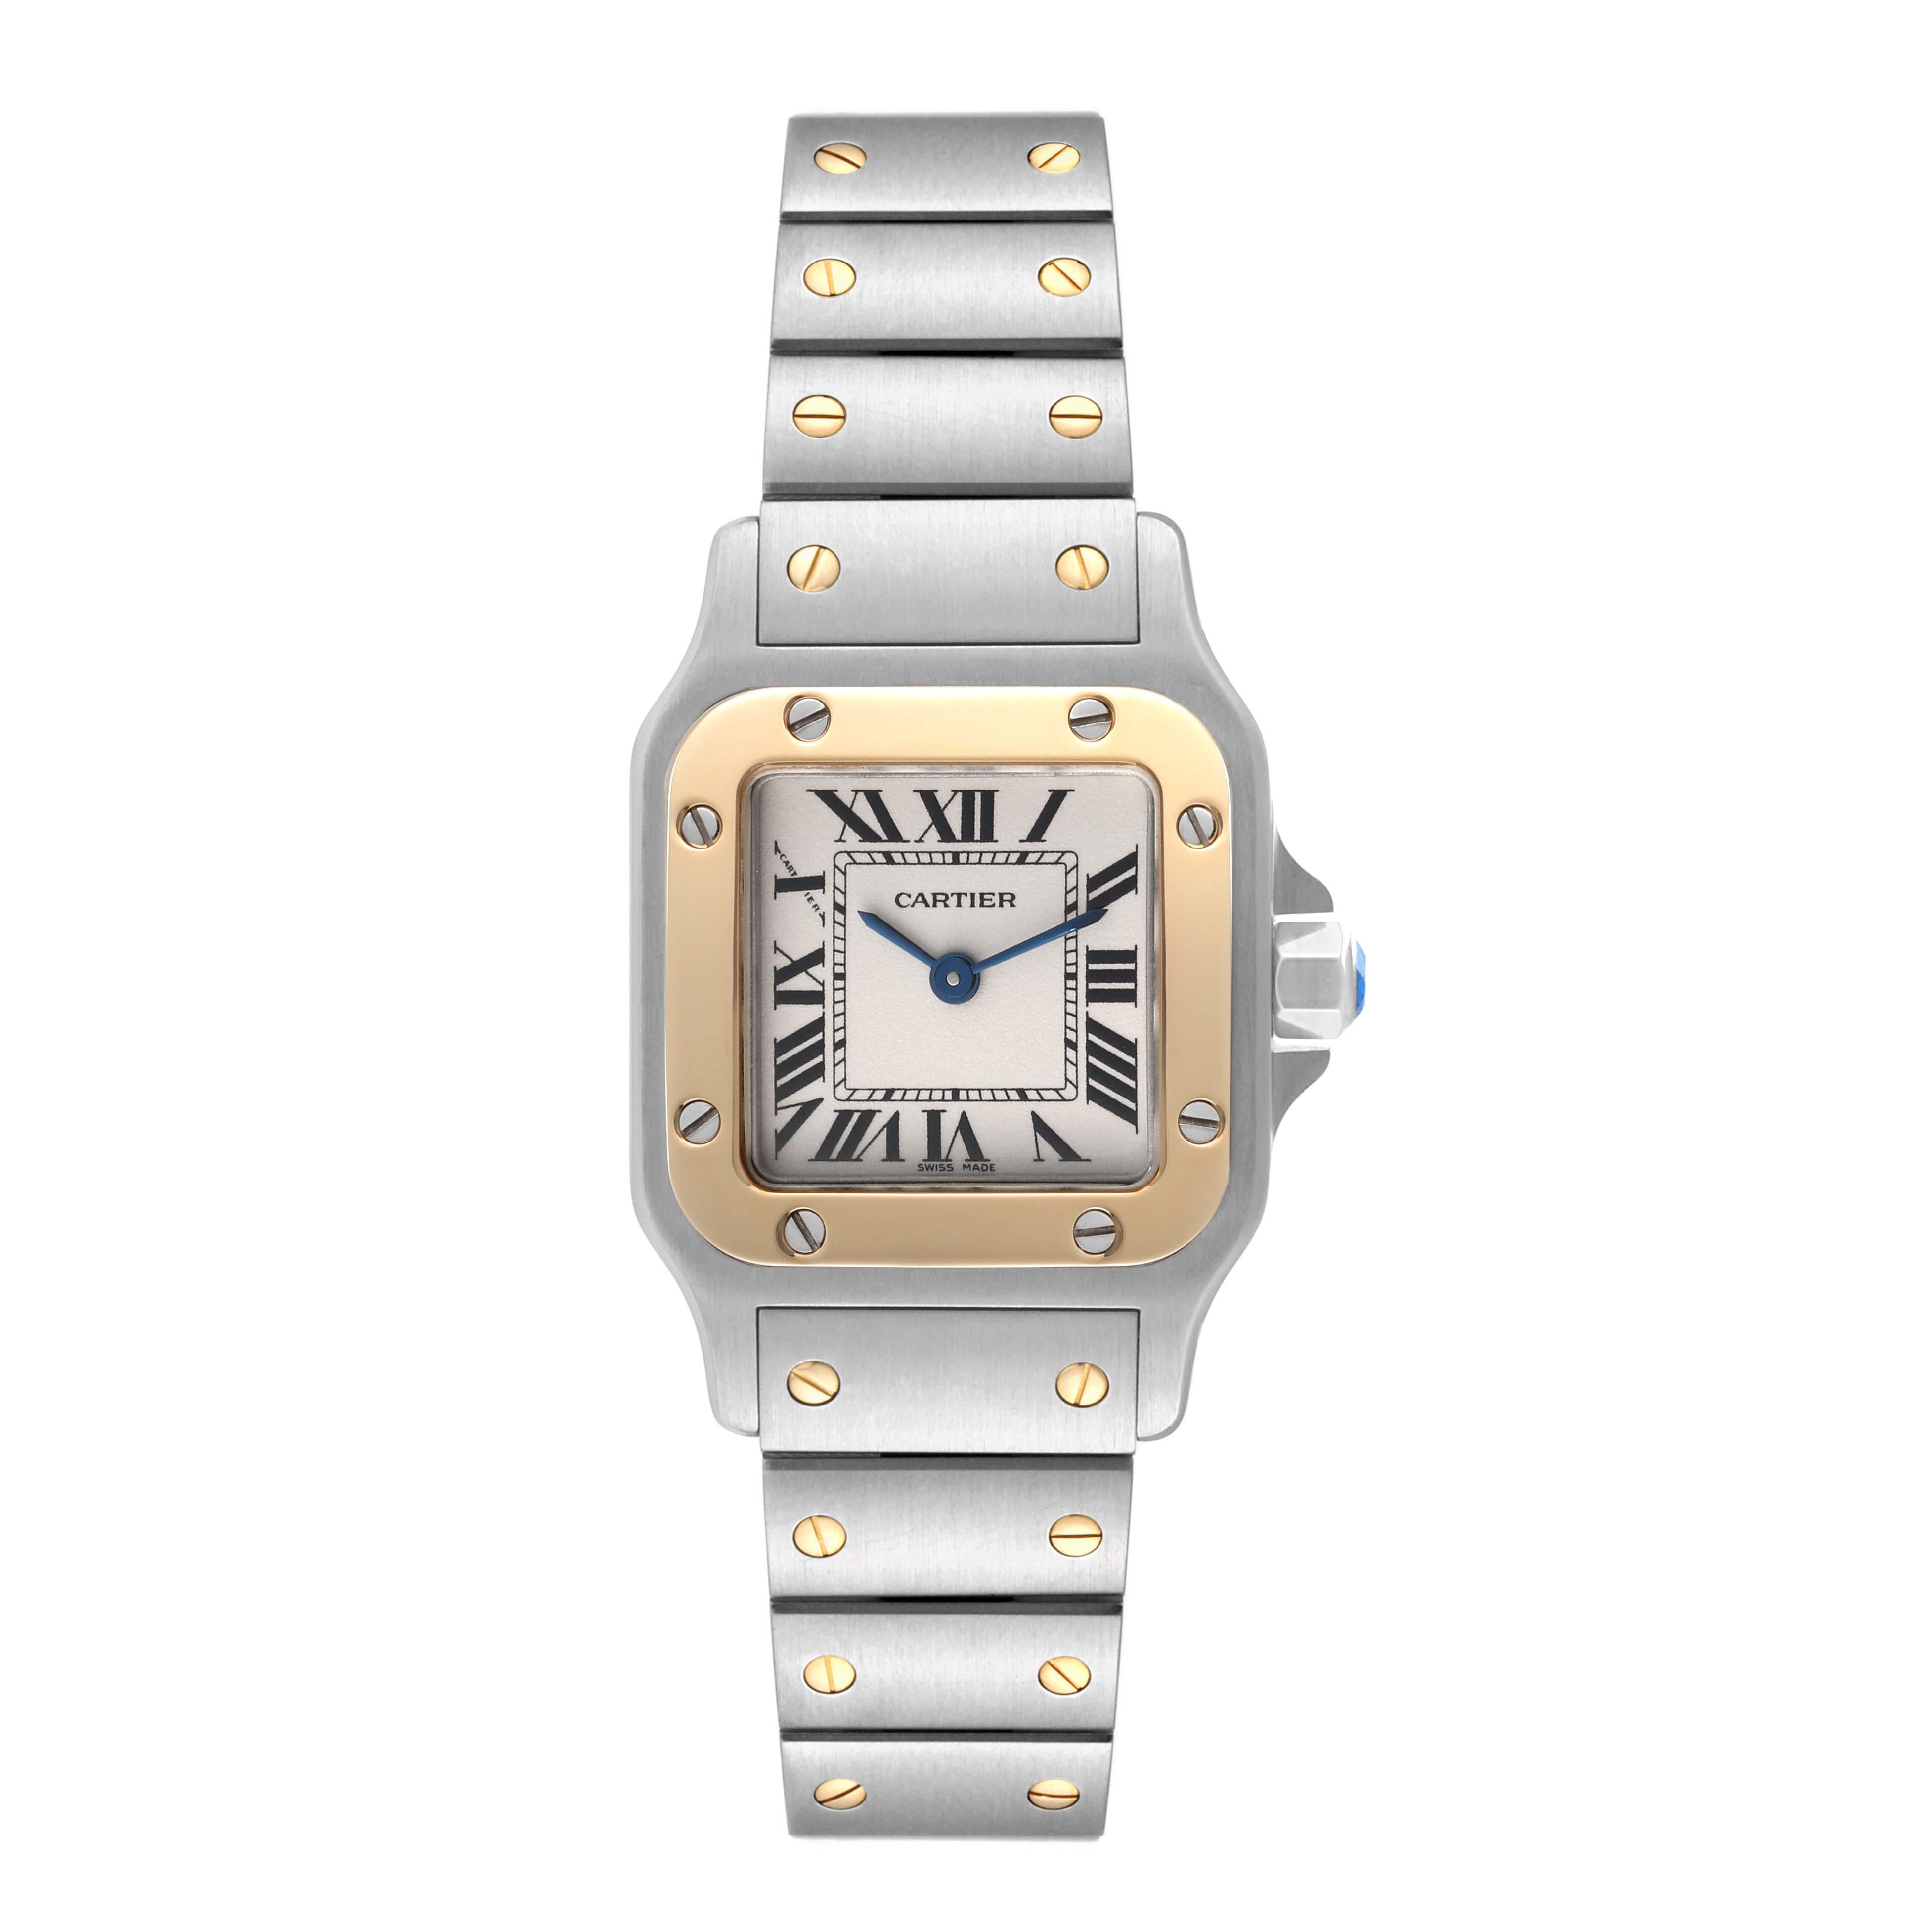 Cartier Santos Galbee Small Steel Yellow Gold Ladies Watch W20012C4 Box Papers. Quartz movement. Stainless steel case 24.0 x 34.7 mm. Steel octagonal crown set with a faceted blue spinel. 18K yellow gold bezel punctuated with 8 signature screws.